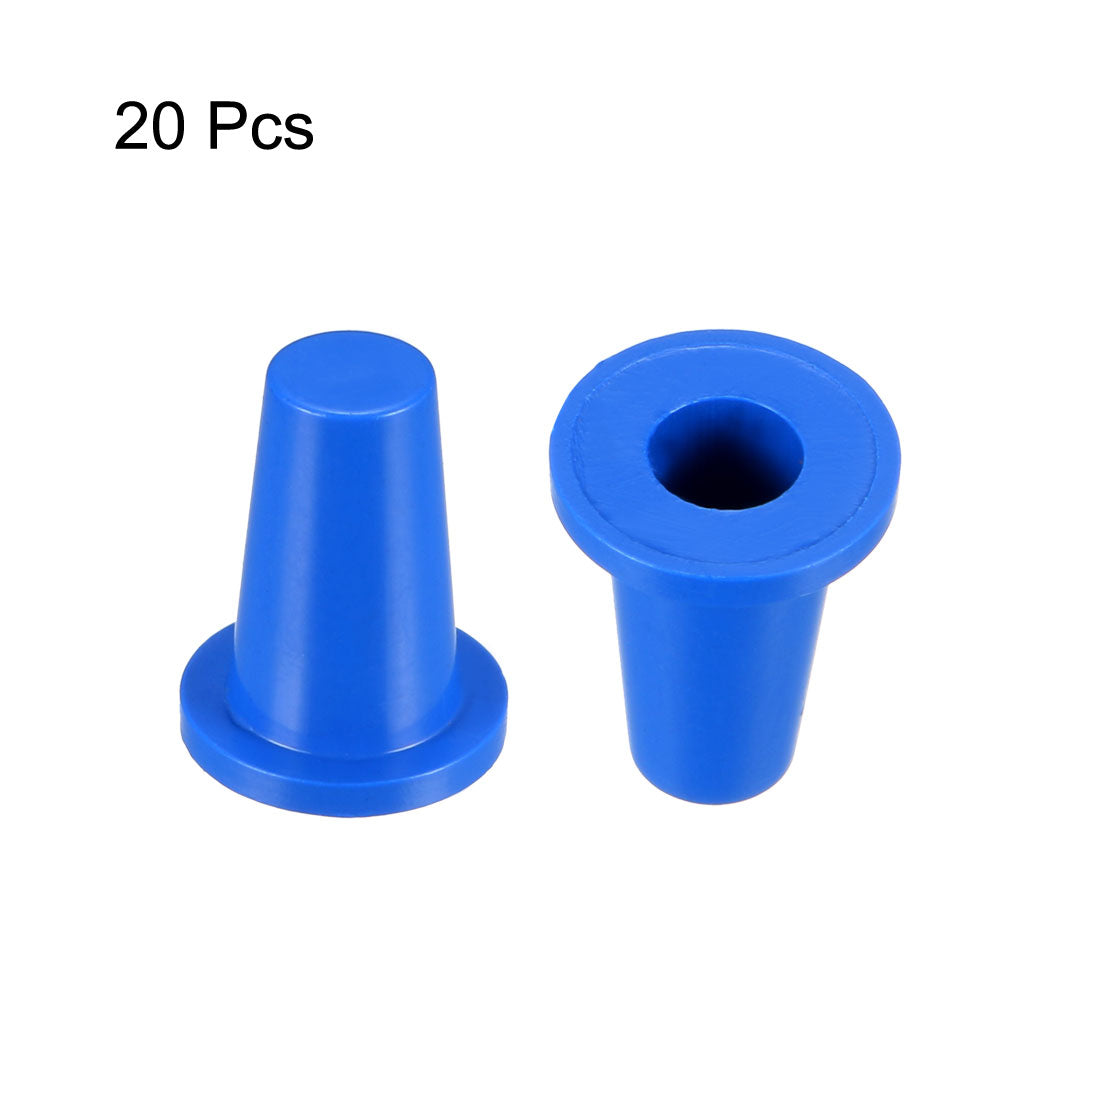 uxcell Uxcell 20Pcs 3.5mm Hole Dia Plastic Push Button Tactile Switch Caps Cover Keycaps Protector Blue for 6x6 Micro Switch